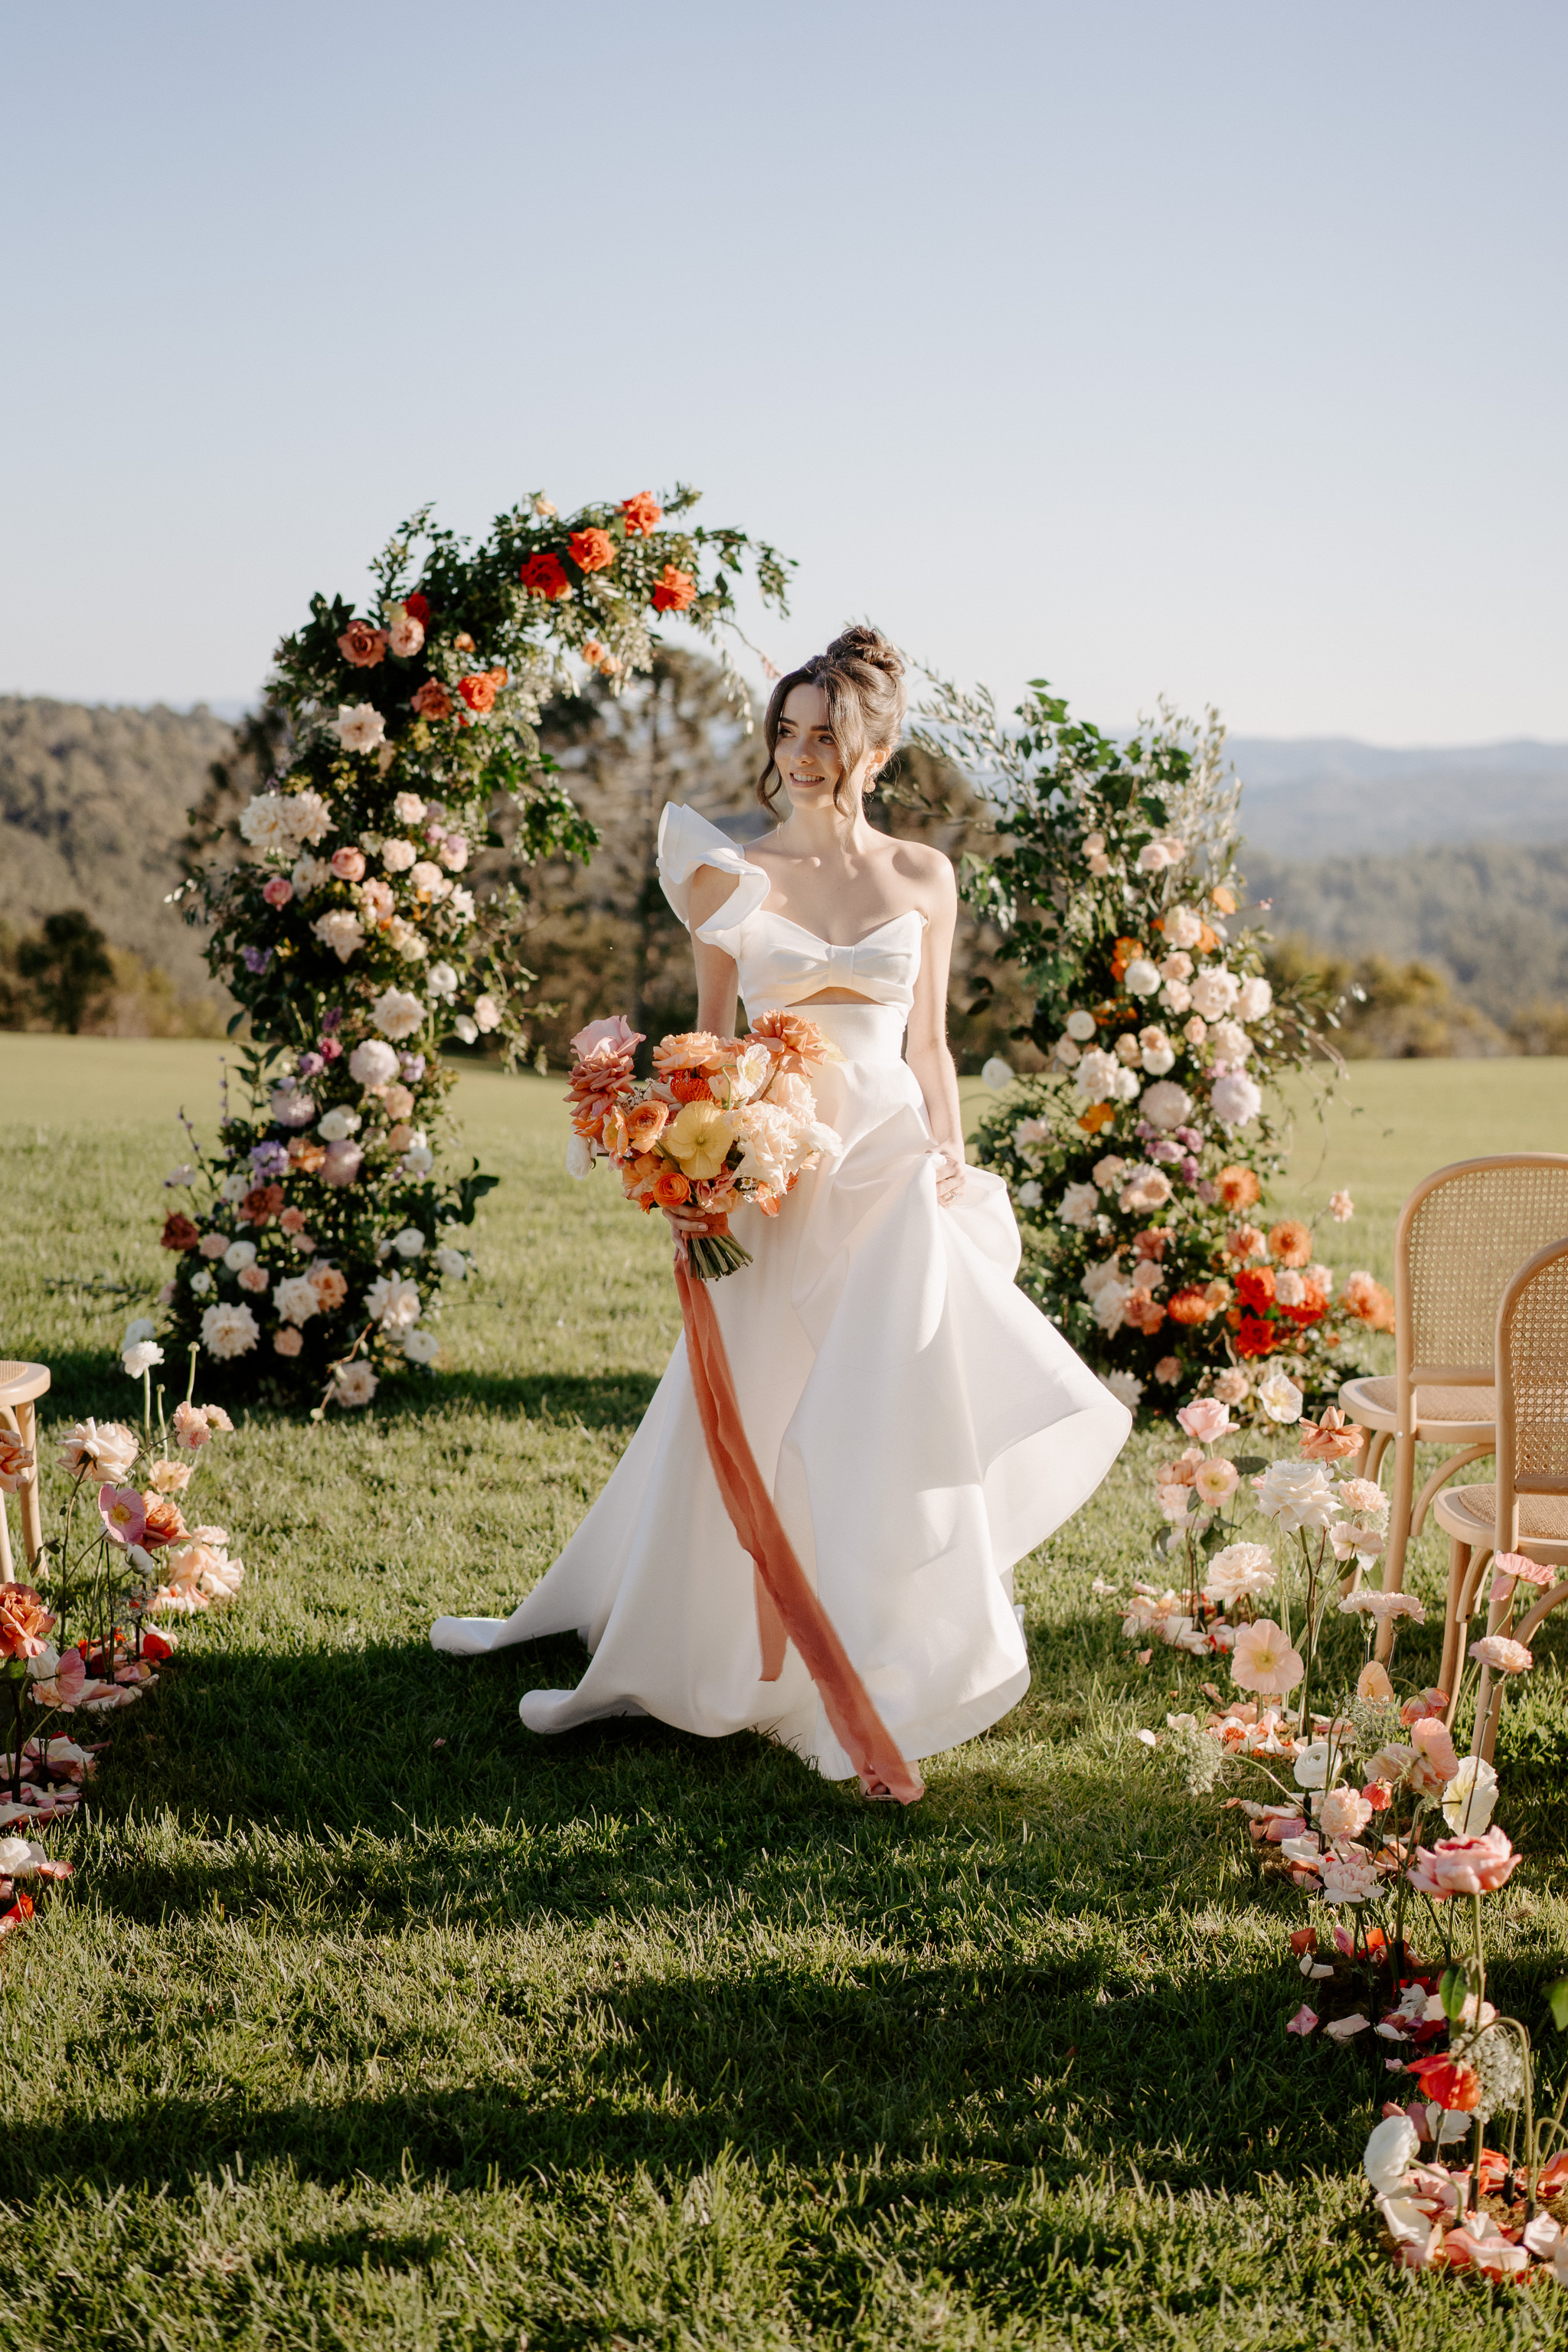 Maleny wedding venue photo shoot with romantic garden theme with trending bright wedding floral design